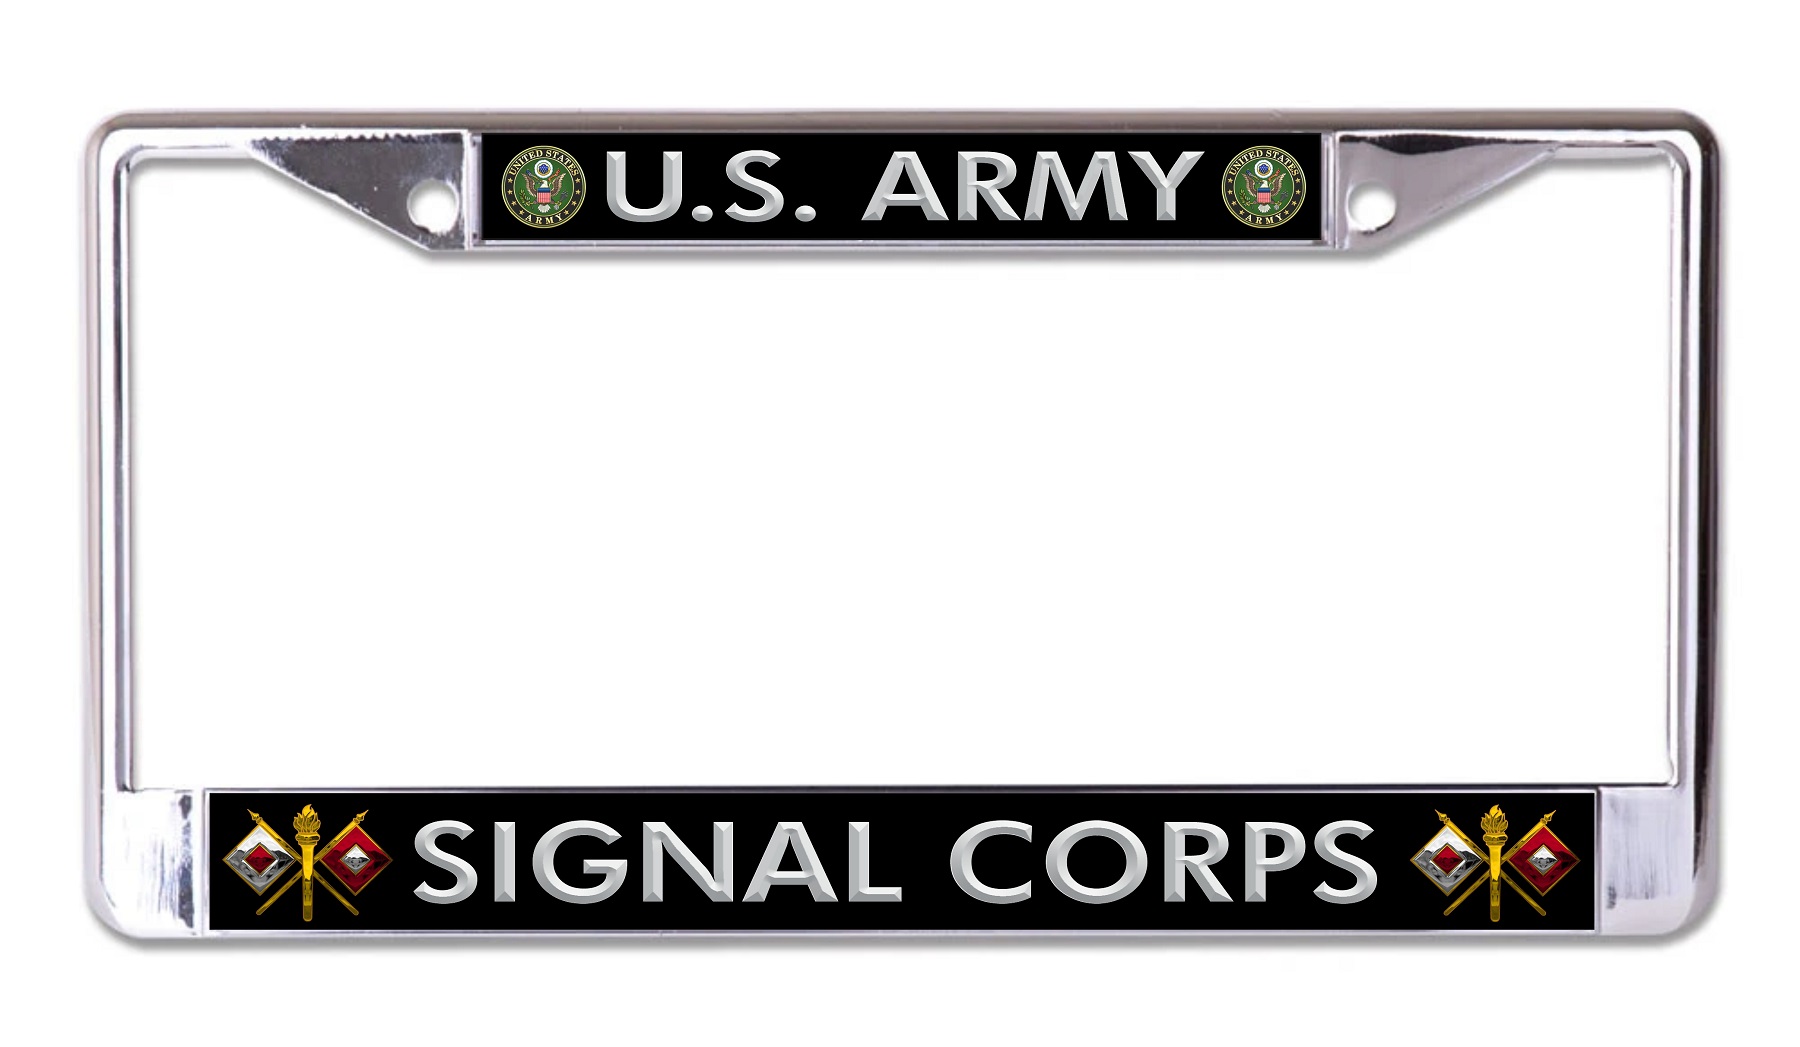 License Plates Online U.S. Army Signal Corps Chrome License Plate Frame